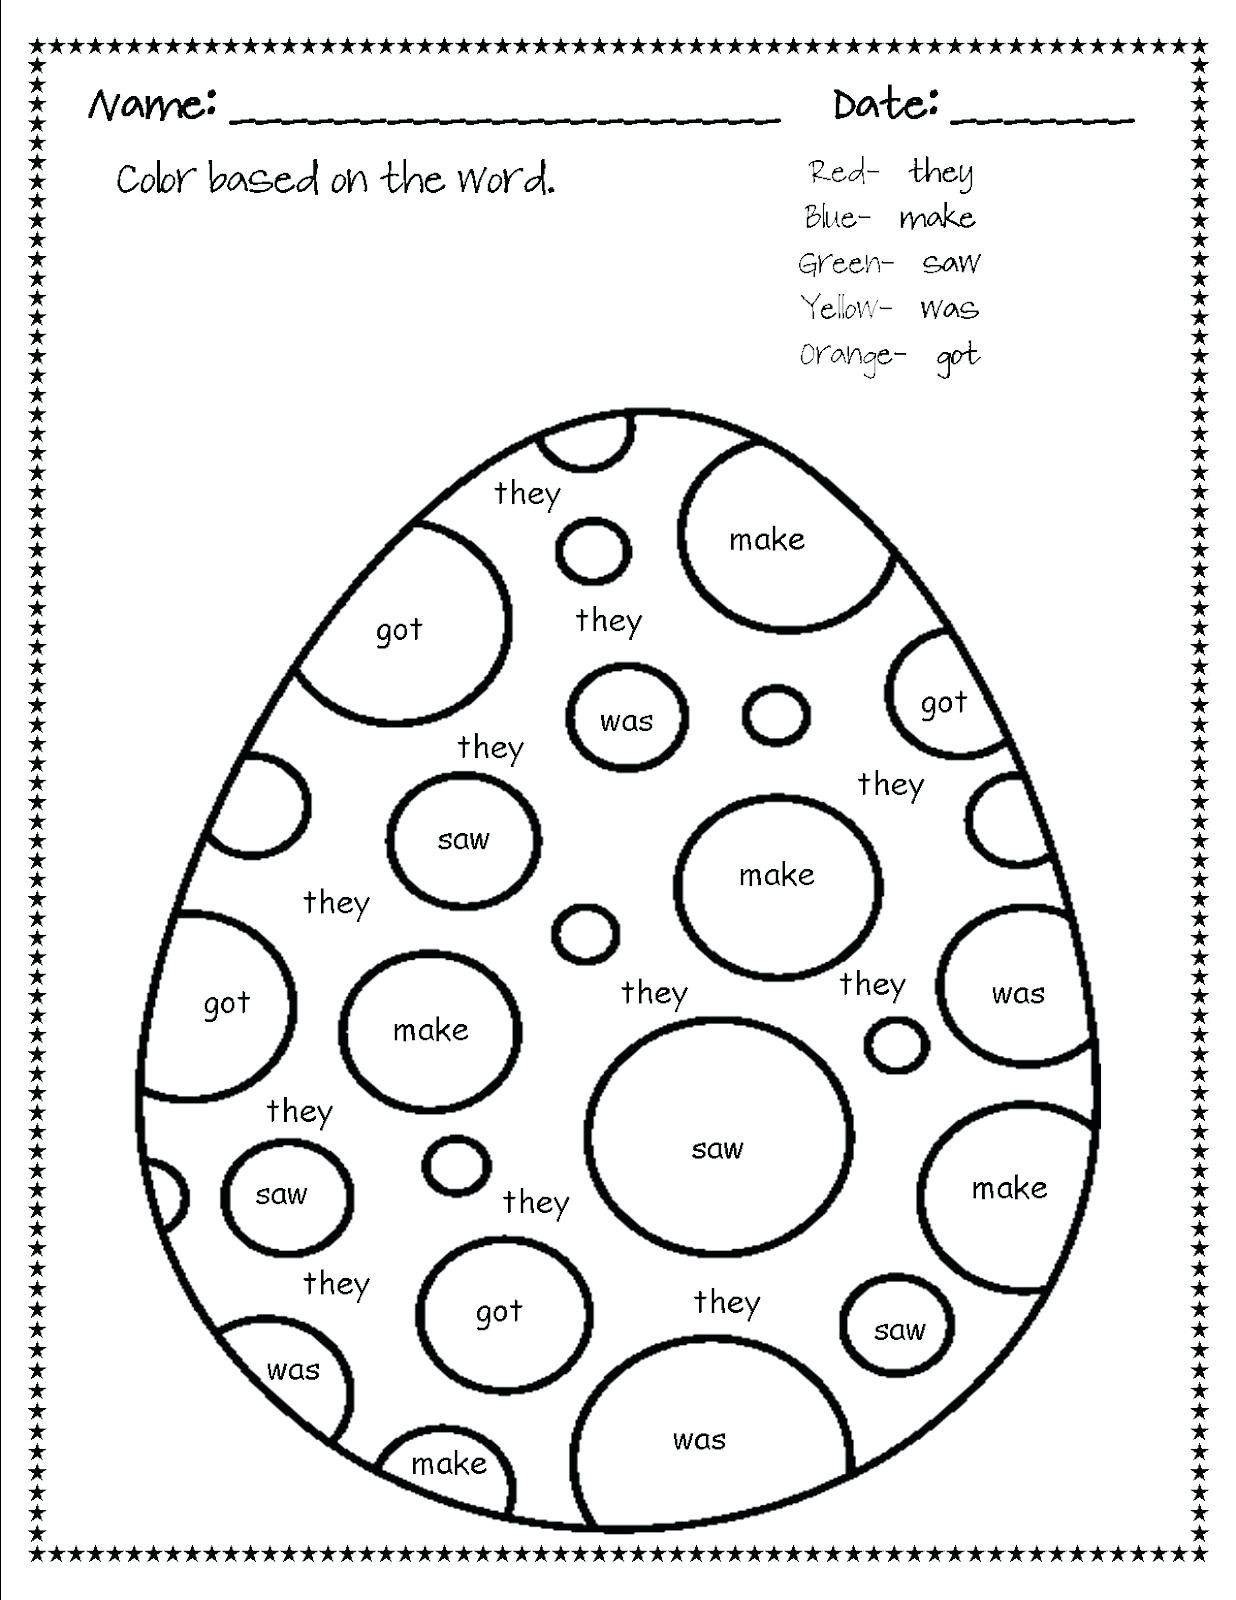 Free Math Worksheets Third Grade 3 Place Value and Rounding Round 3 Digit Numbers Nearest 100